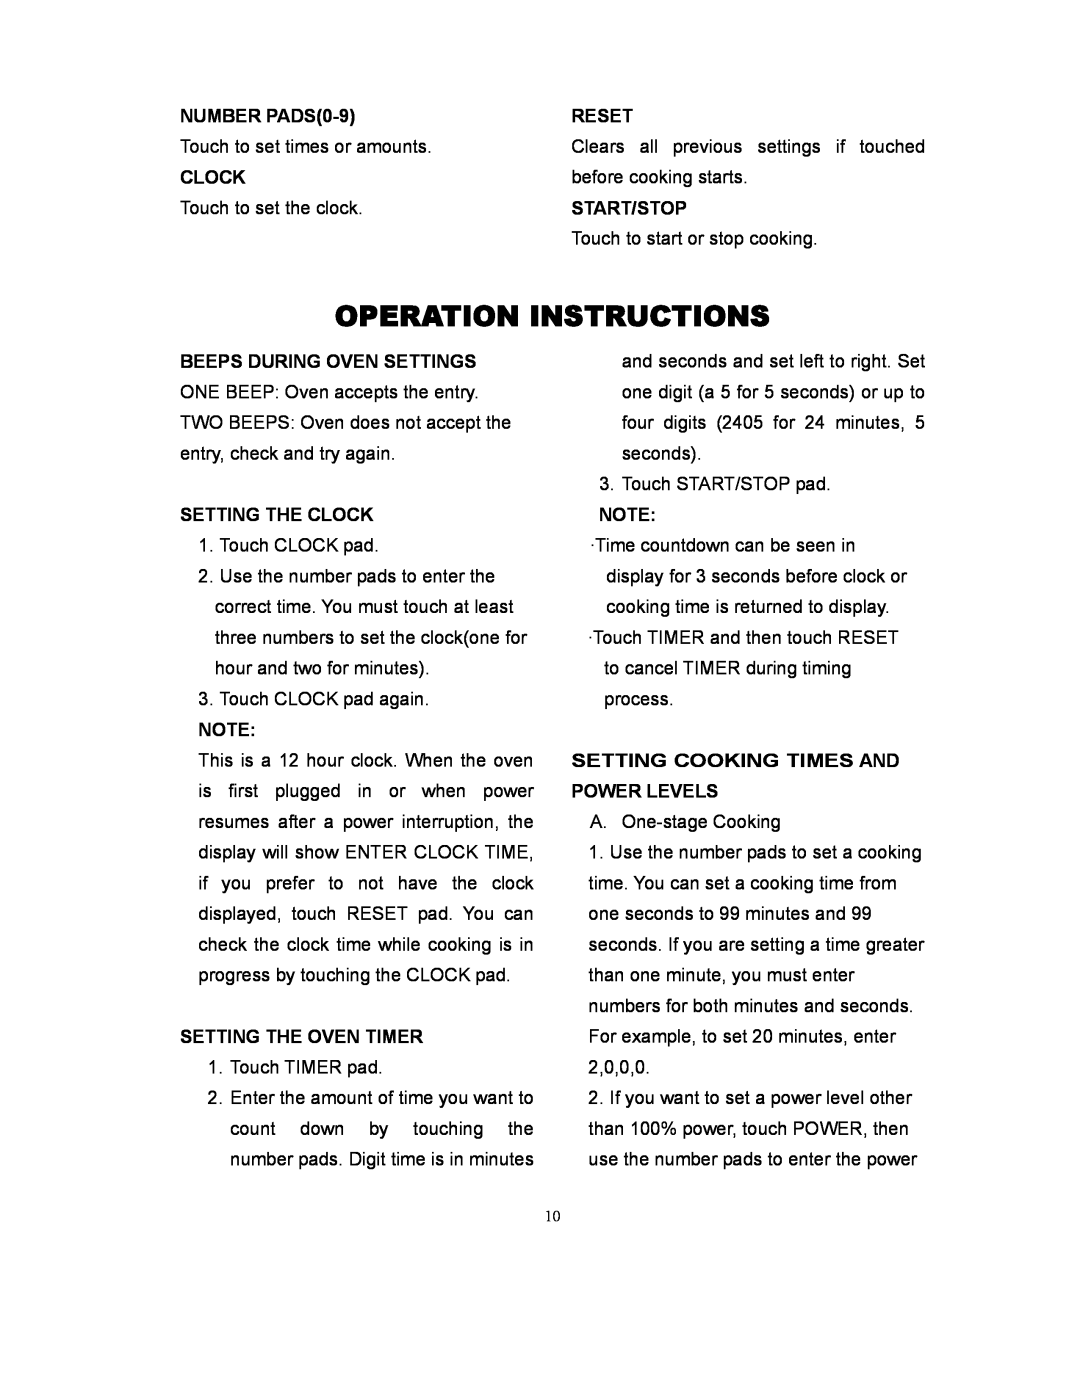 Magic Chef MCD775W Operation Instructions, NUMBER PADS0-9, Clock, Reset, Start/Stop, Beeps During Oven Settings 